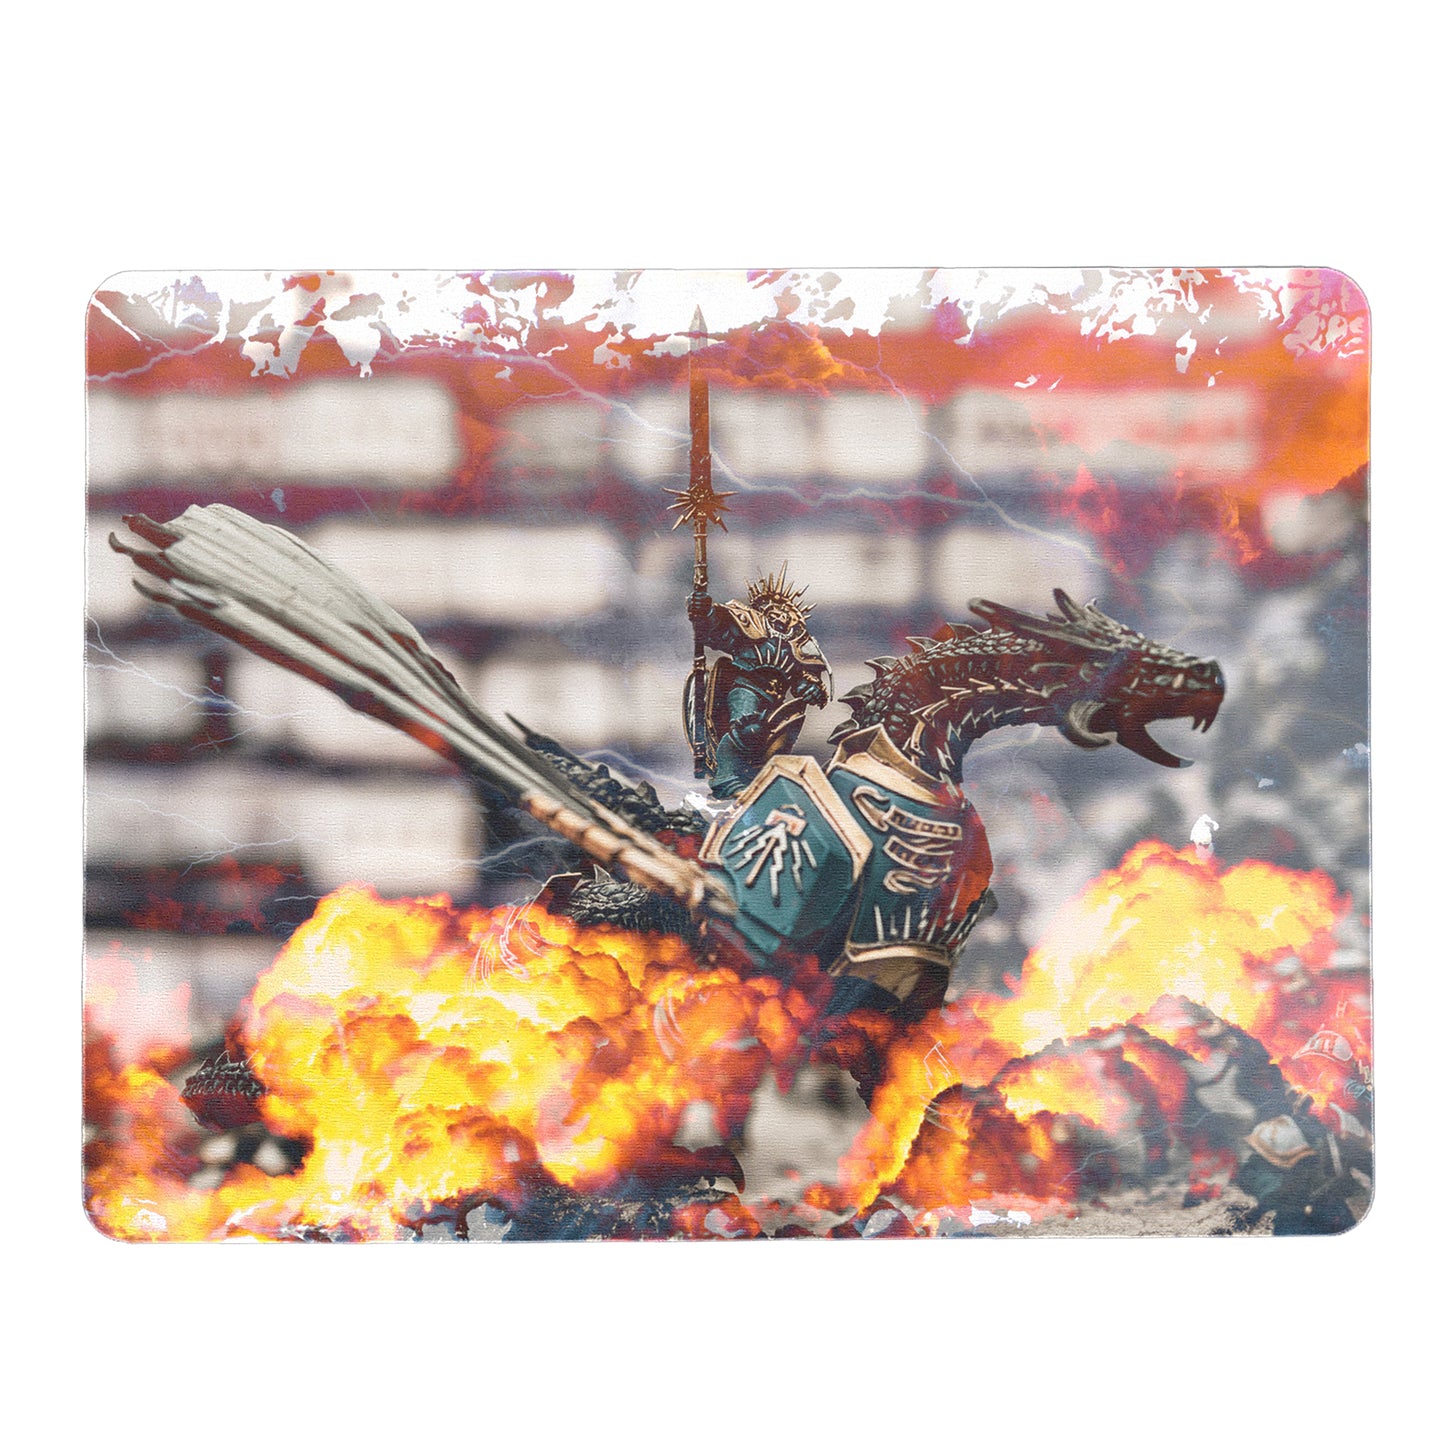 Warhammer Mouse Pad